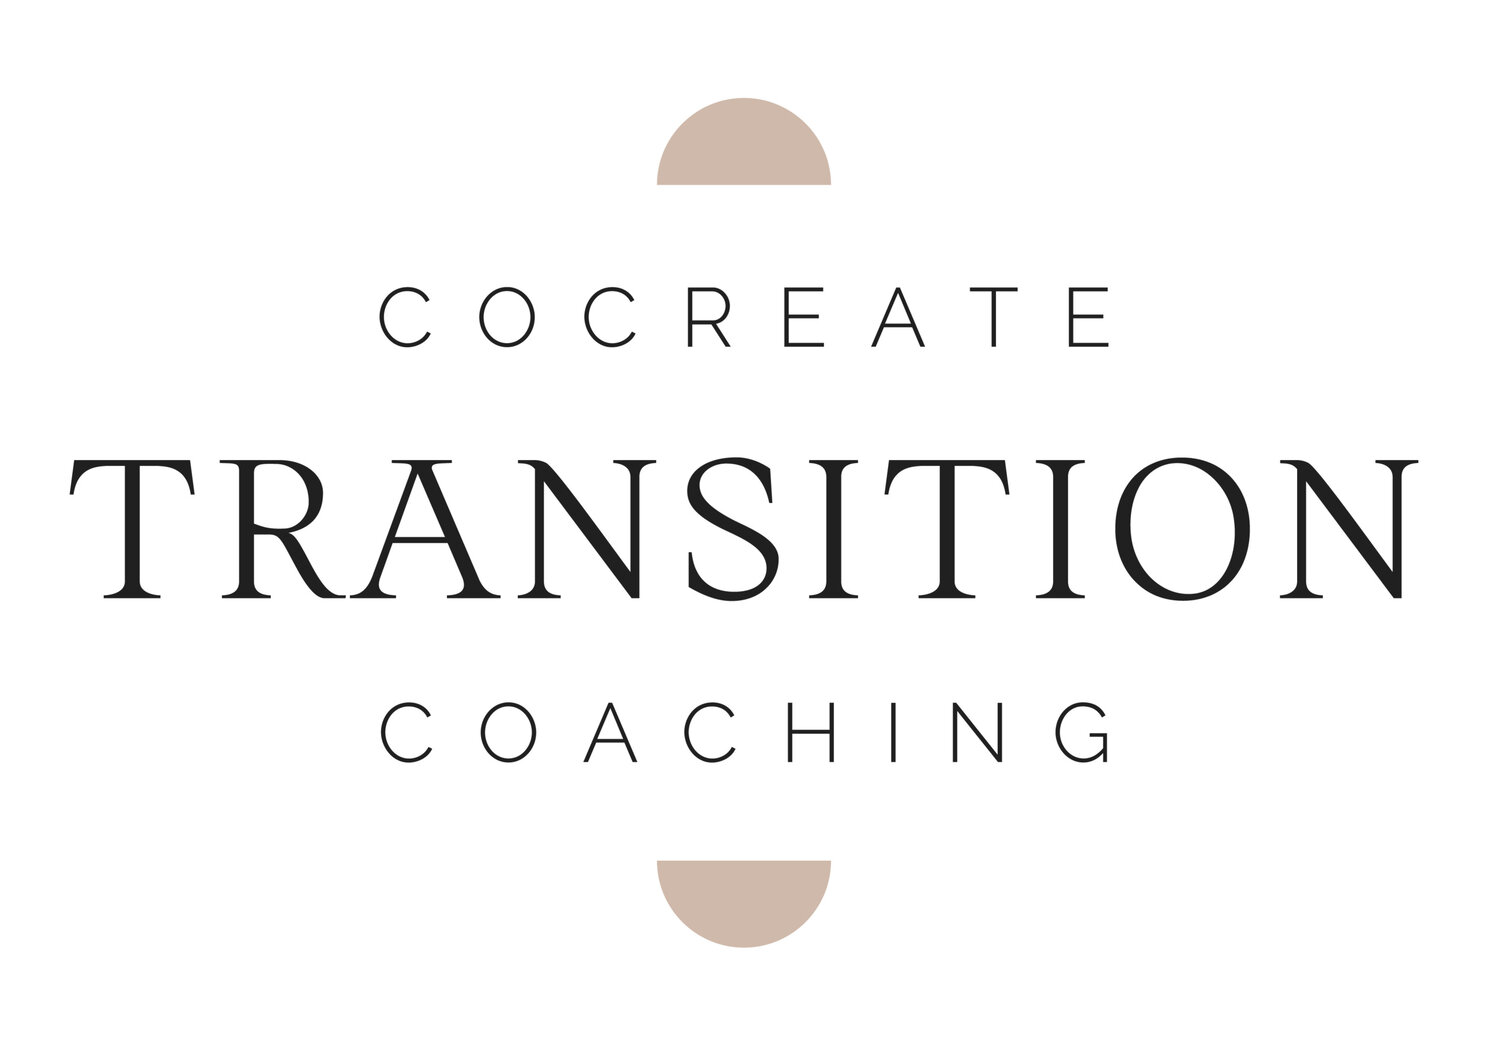 Cocreate Transition Coaching